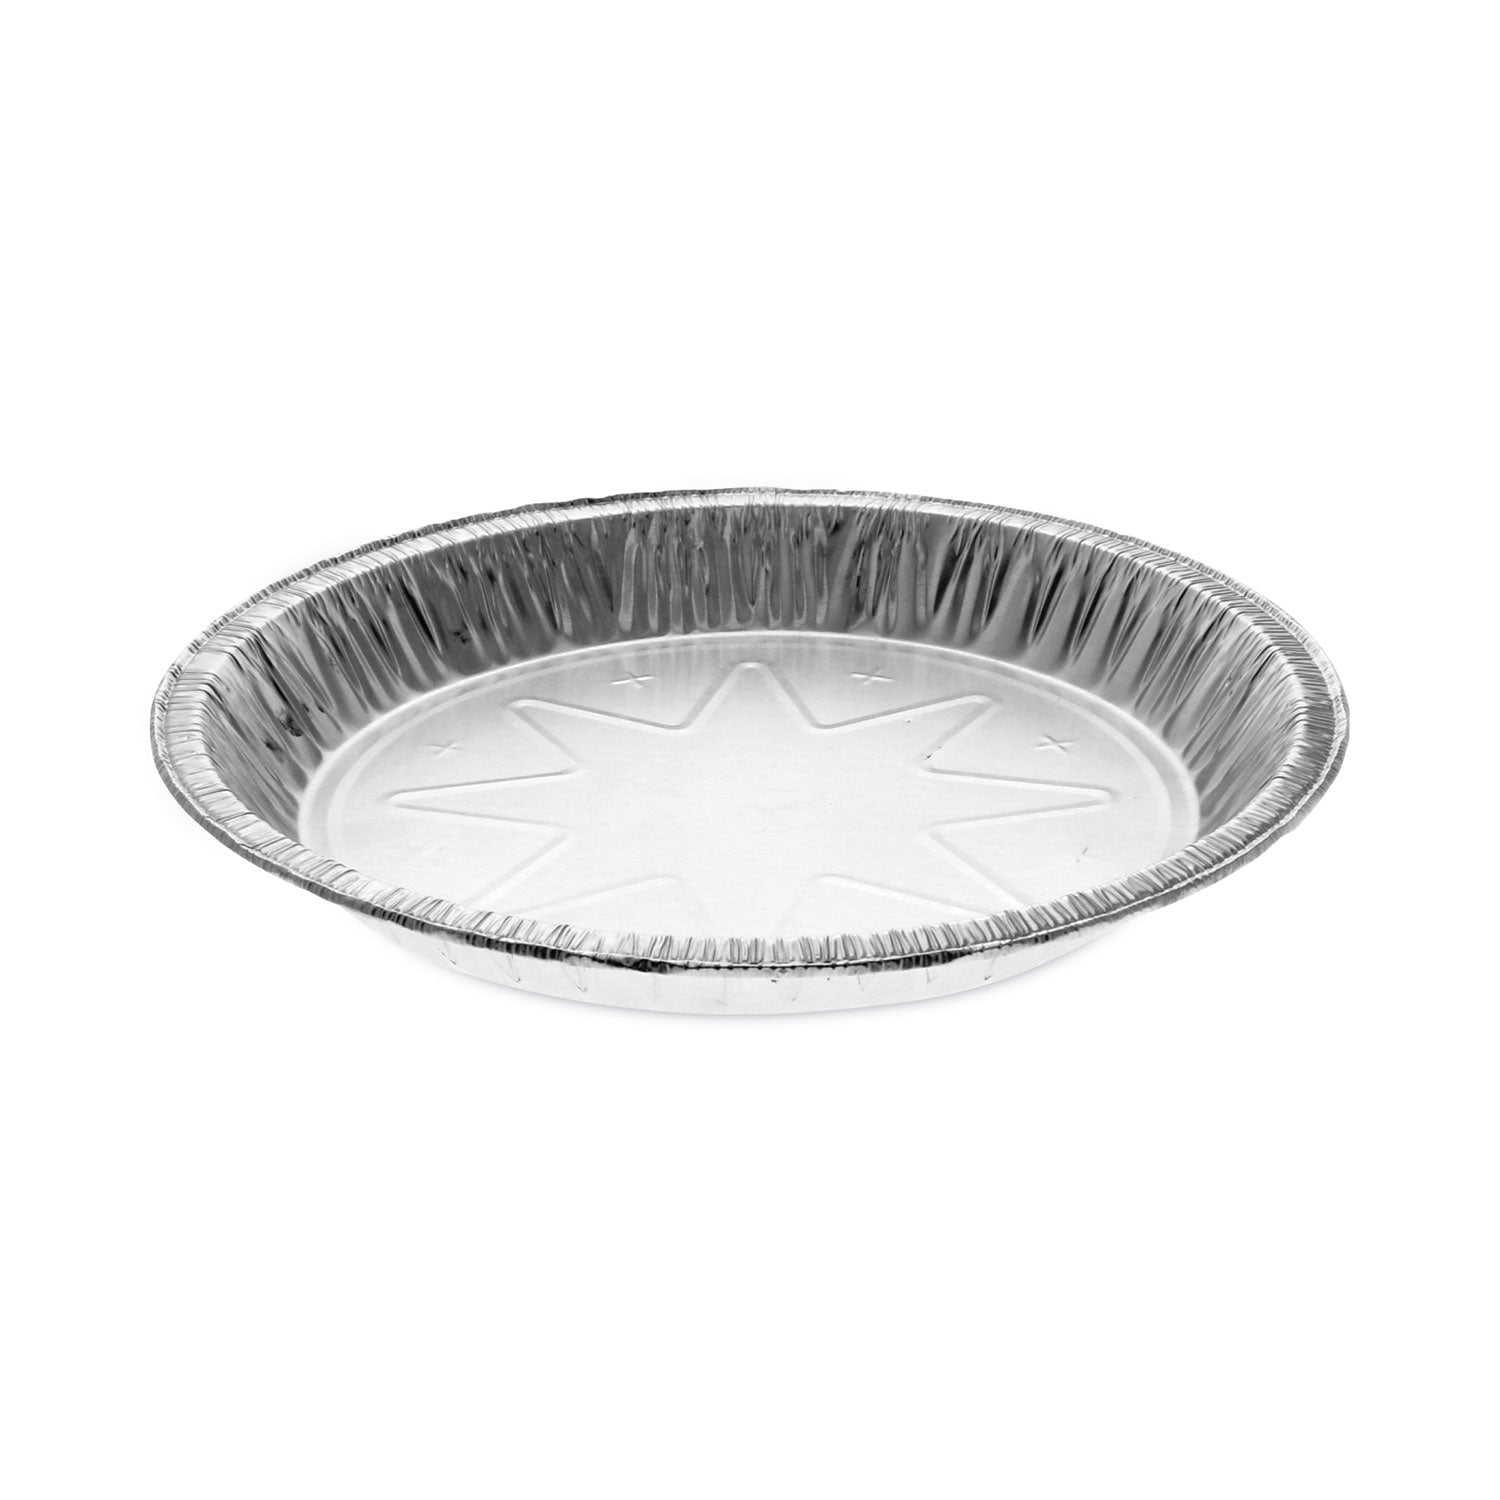 round-aluminum-carryout-containers-10-diameter-x-109h-silver-400-carton_pct23045y - 1